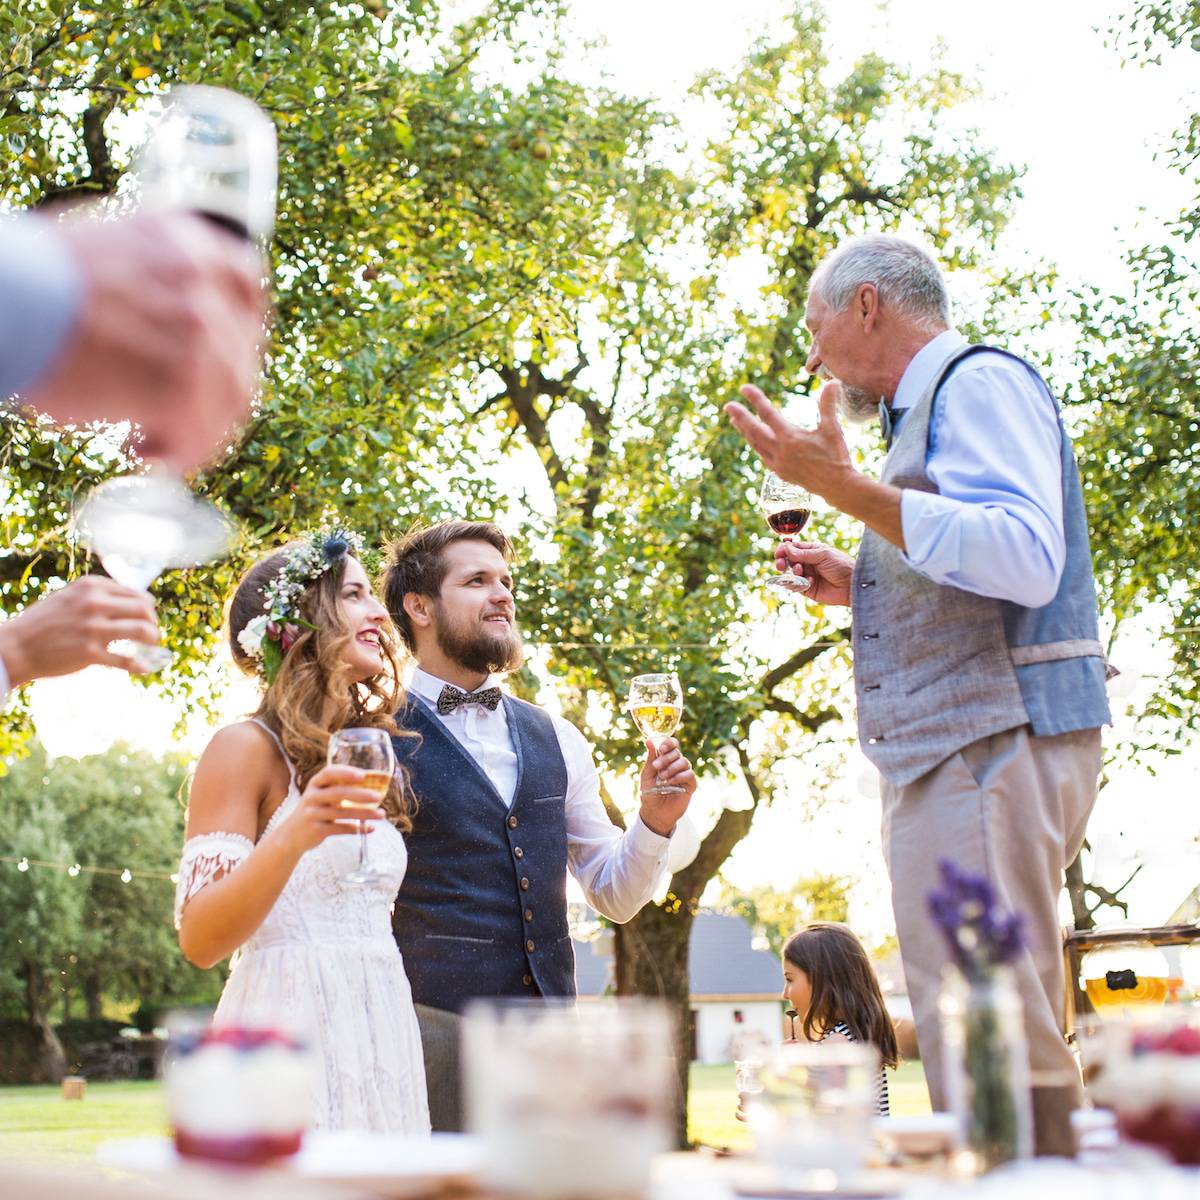 A senior man making speech at wedding reception outside in the background. Bride and groom and other guests holding glasses.